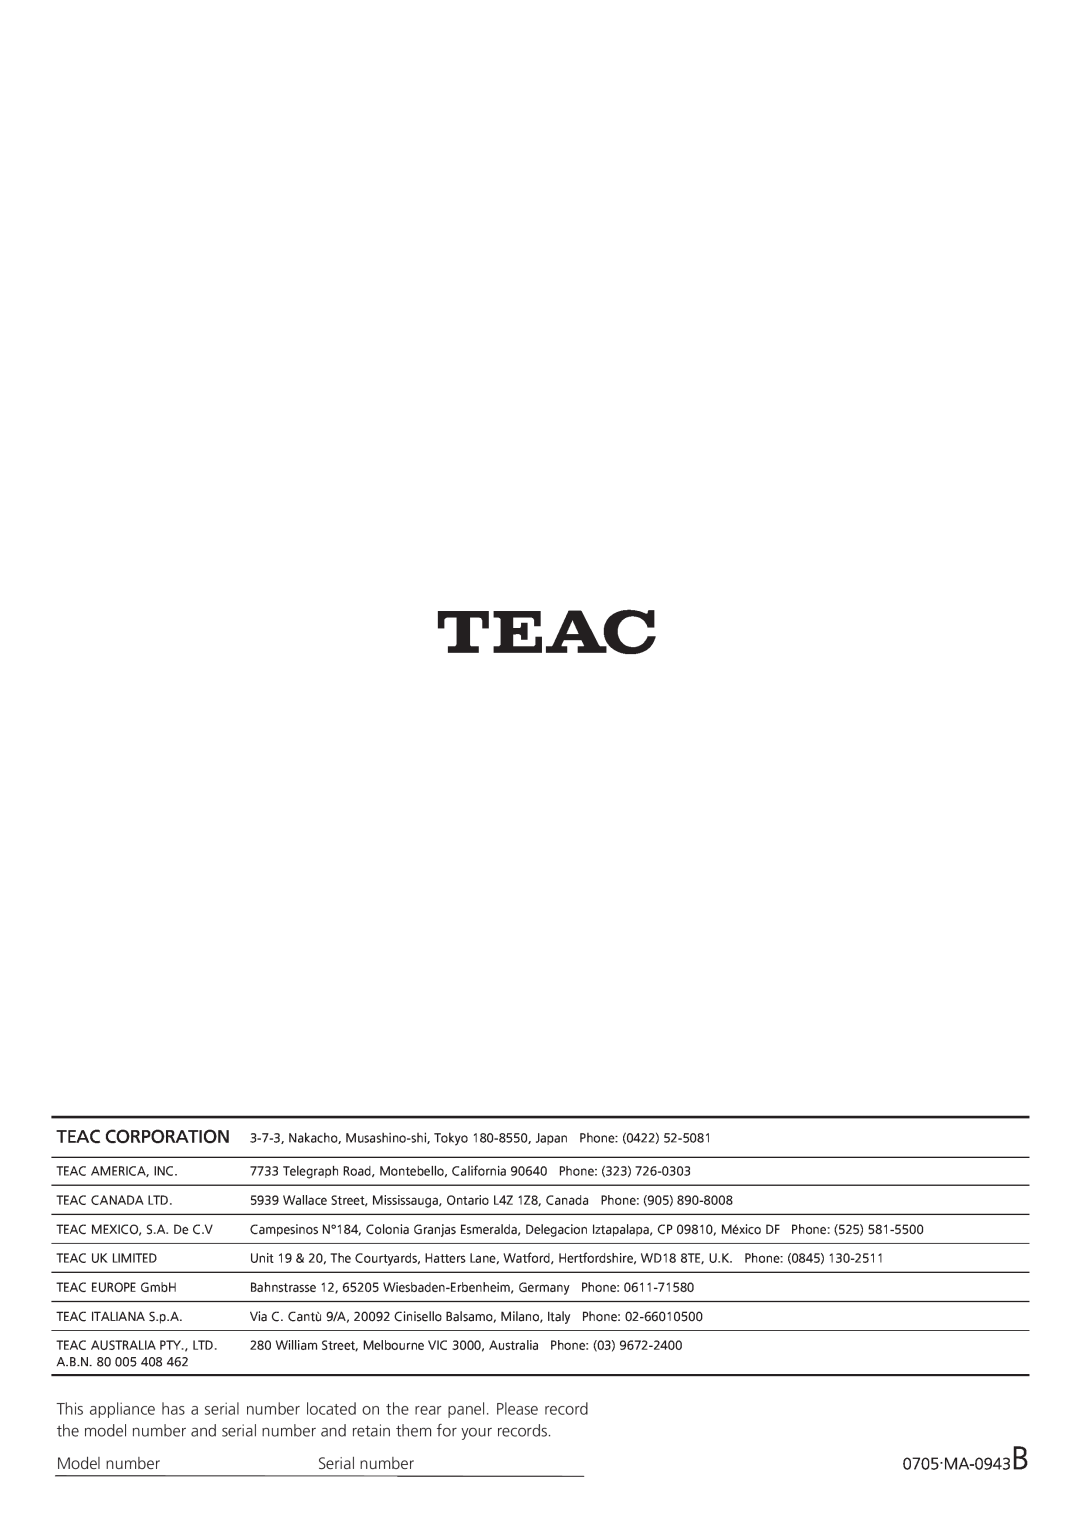 Teac MC-DX20 owner manual Teac Corporation, 0705.MA-0943B, Model number, Serial number 